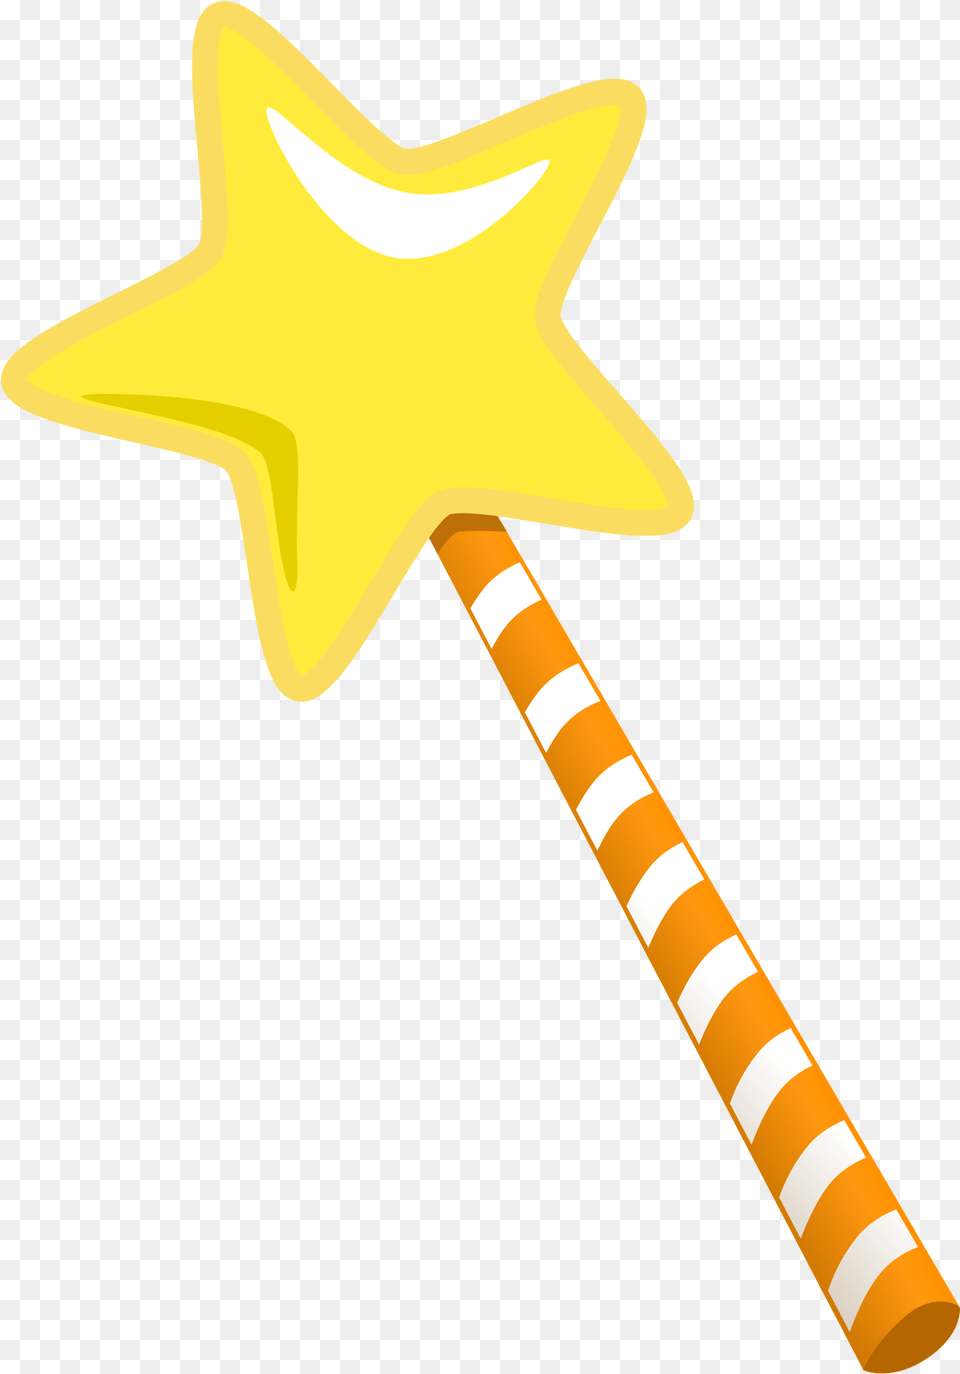 Magic Wand Cartoon Style Clip Arts Covid 19 Campaign, Smoke Pipe Free Transparent Png